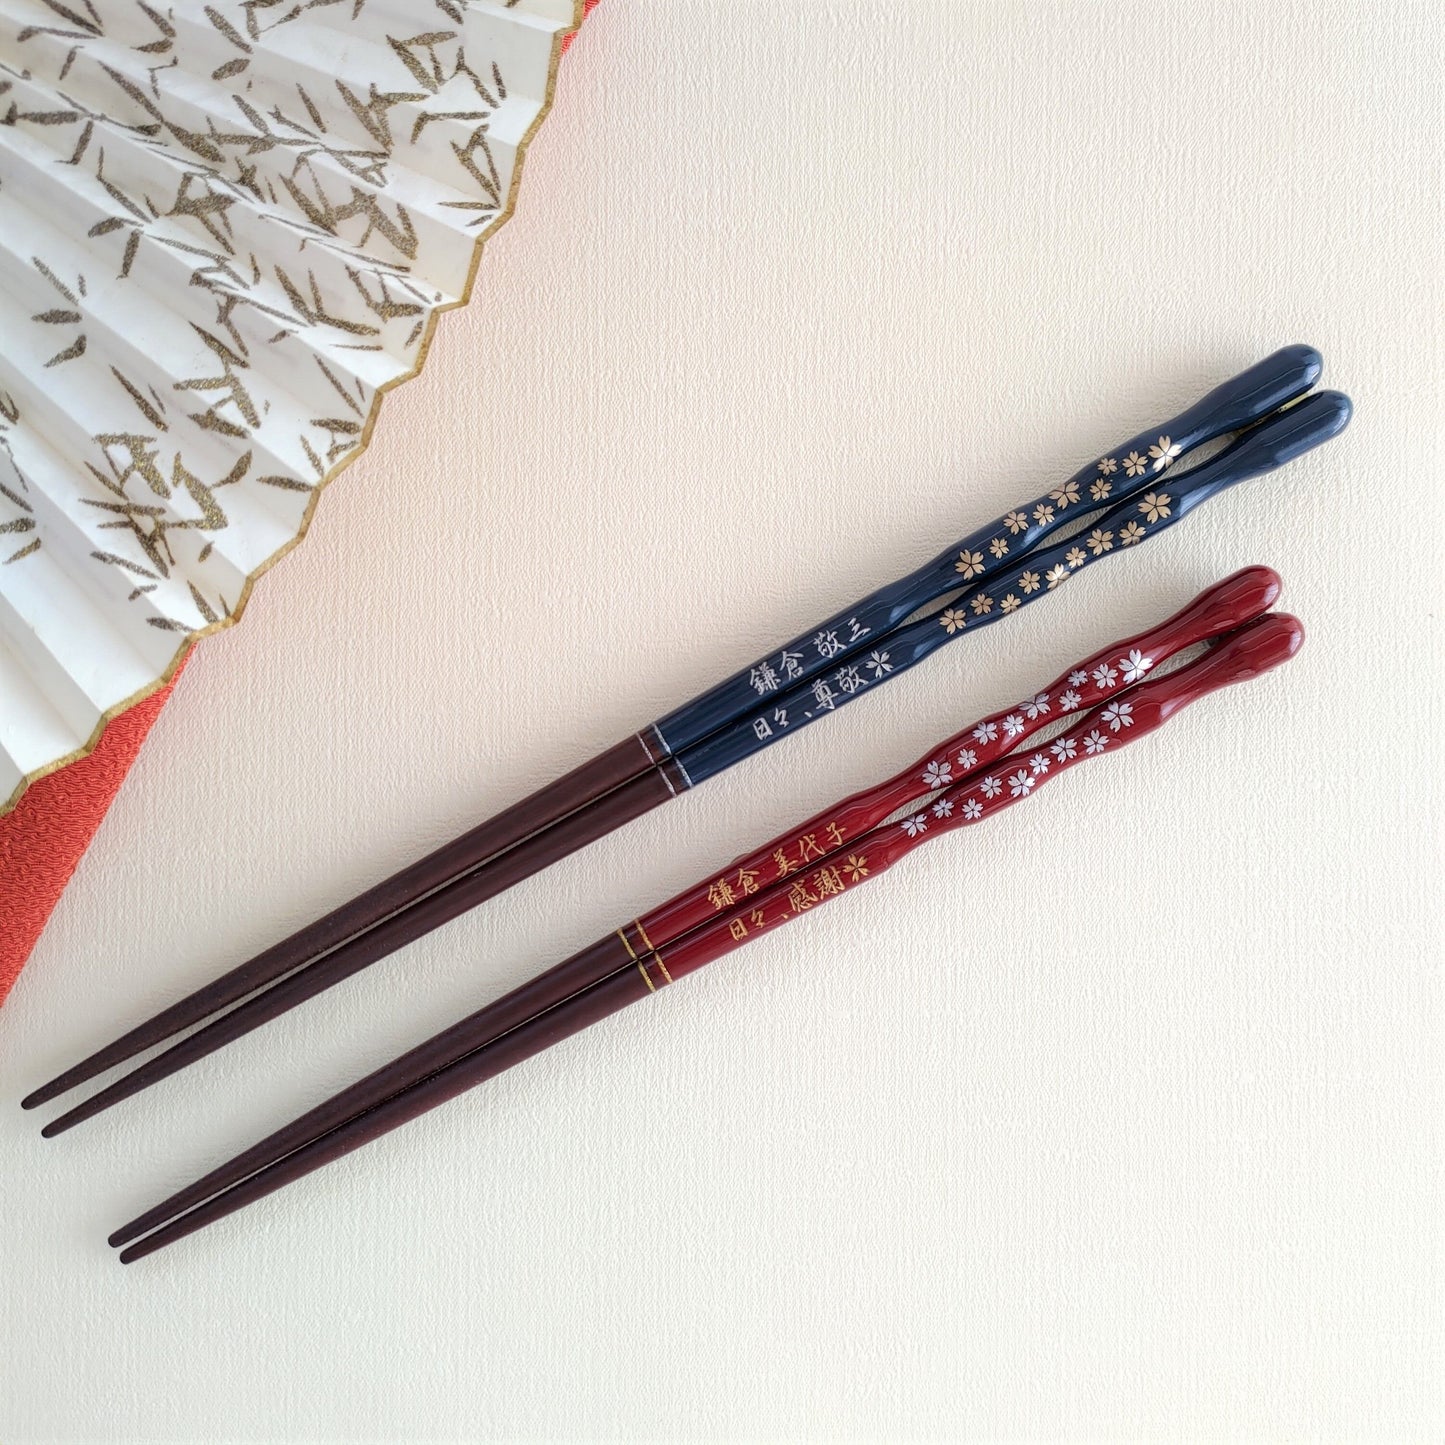 Gold and silver cherry blossoms Japanese chopsticks blue red - DOUBLE PAIR